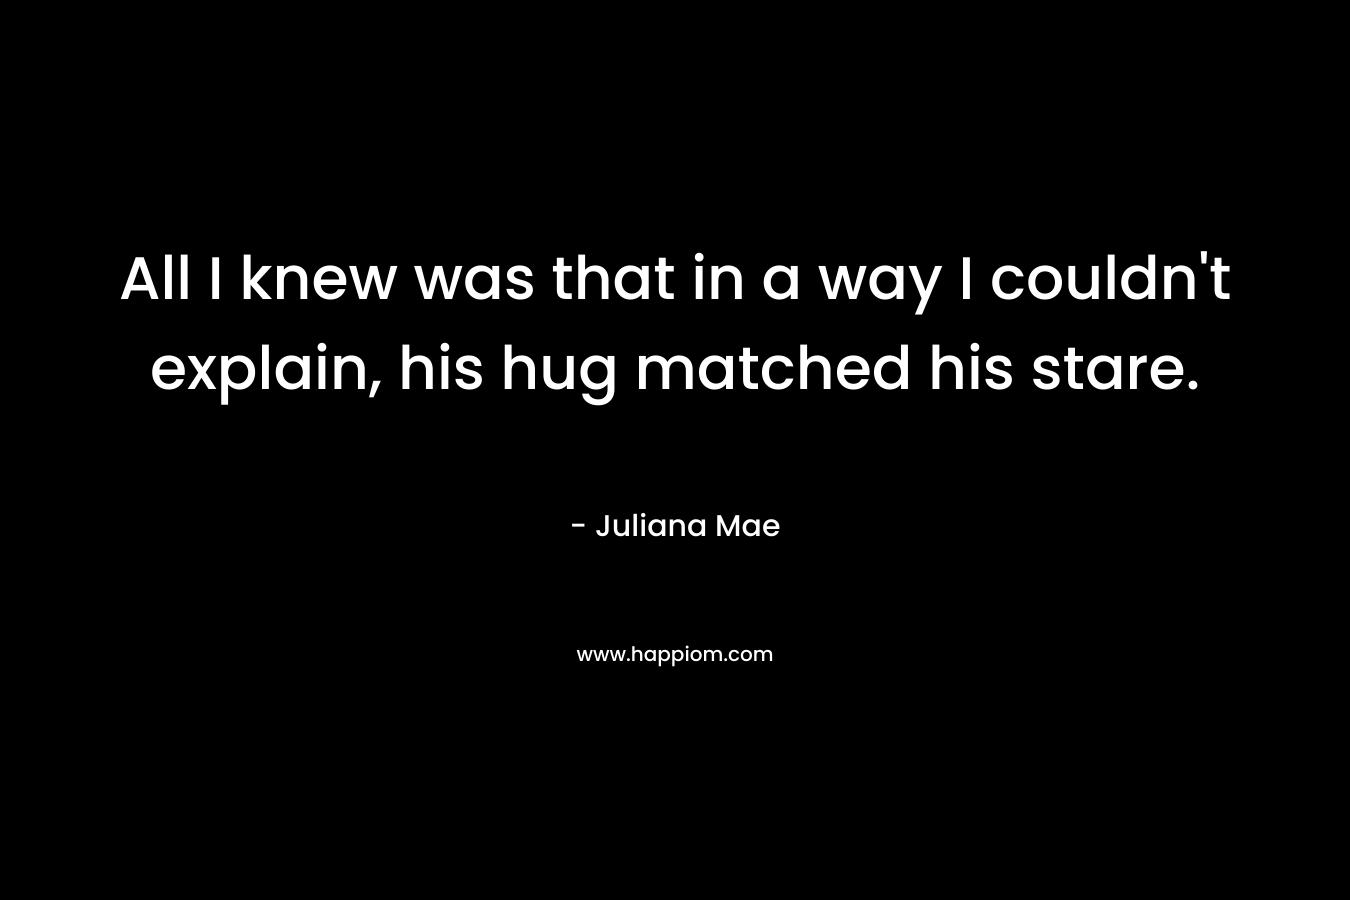 All I knew was that in a way I couldn’t explain, his hug matched his stare. – Juliana Mae